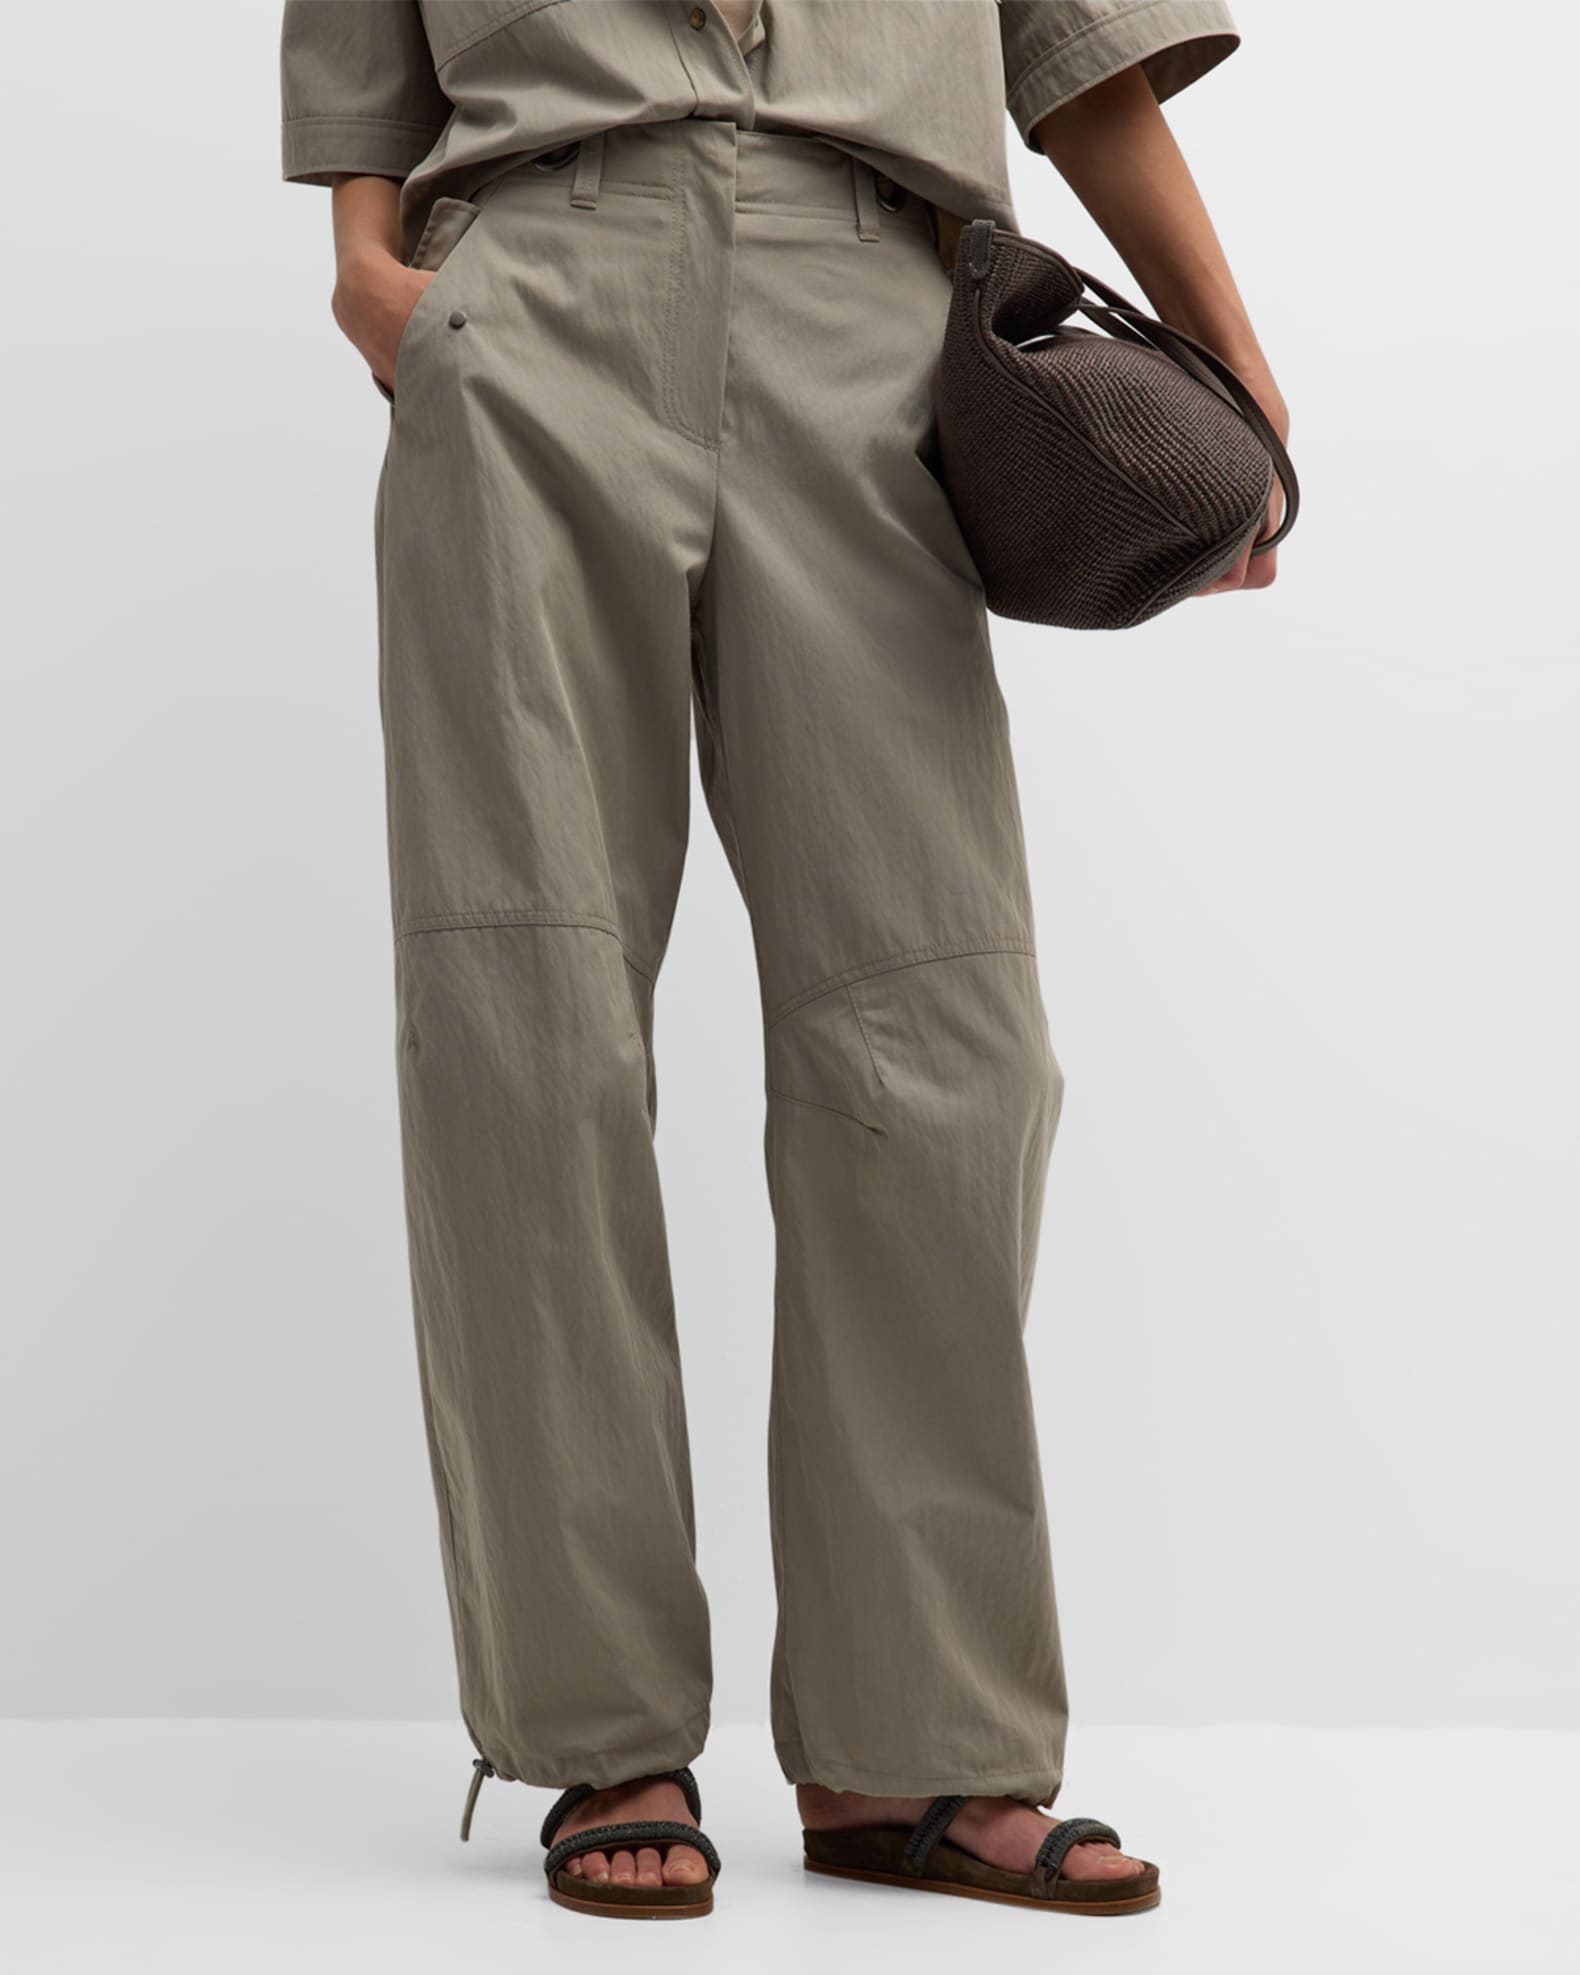 Brunello Cucinelli Lightly Wrinkled Cotton Curved Pants